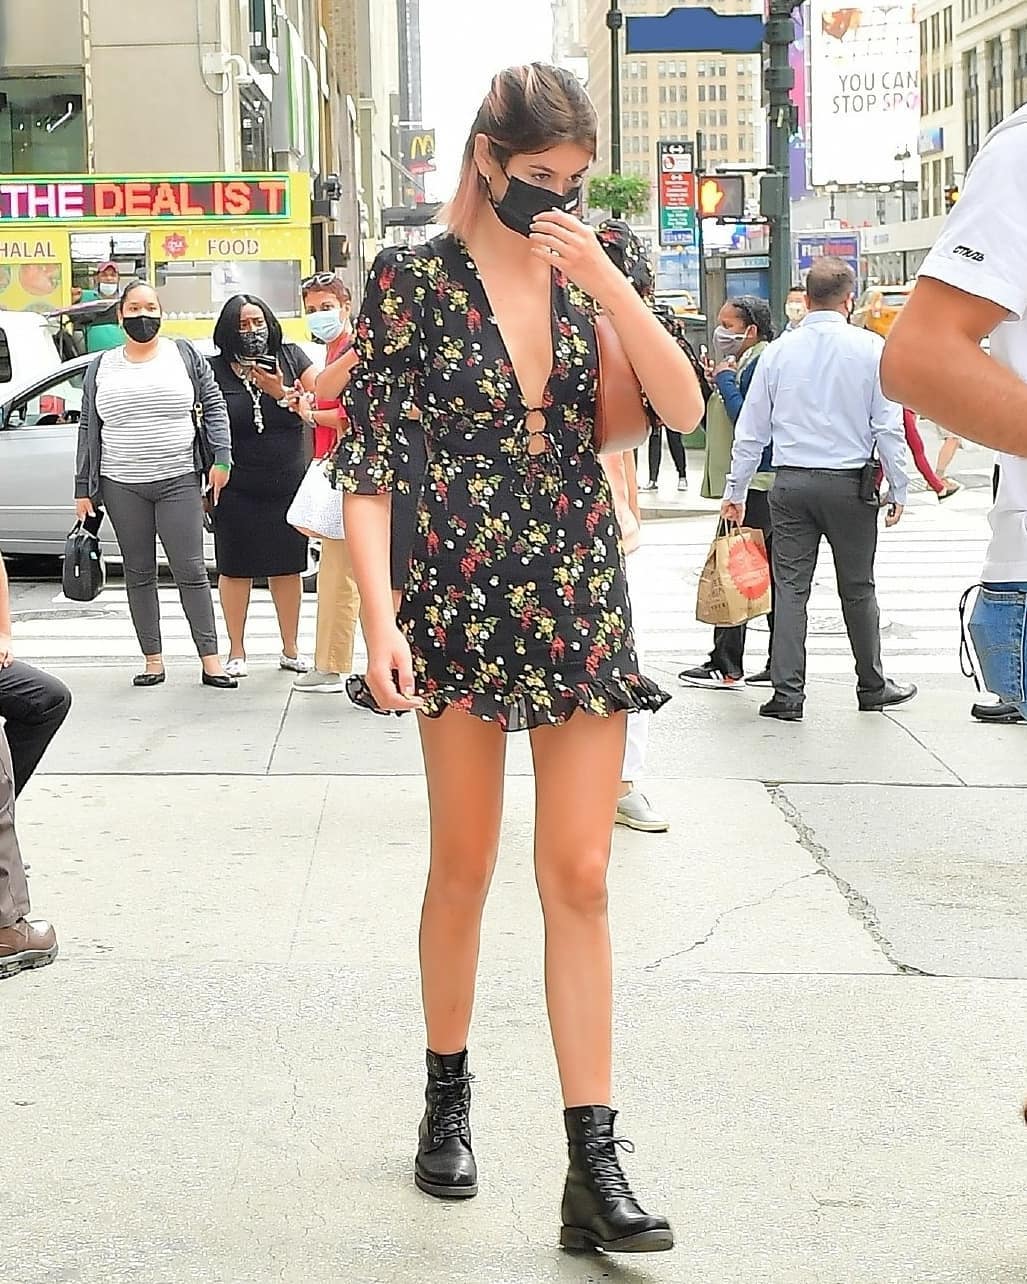 kaia-gerber-in-reformation-dress-out-in-new-york-city